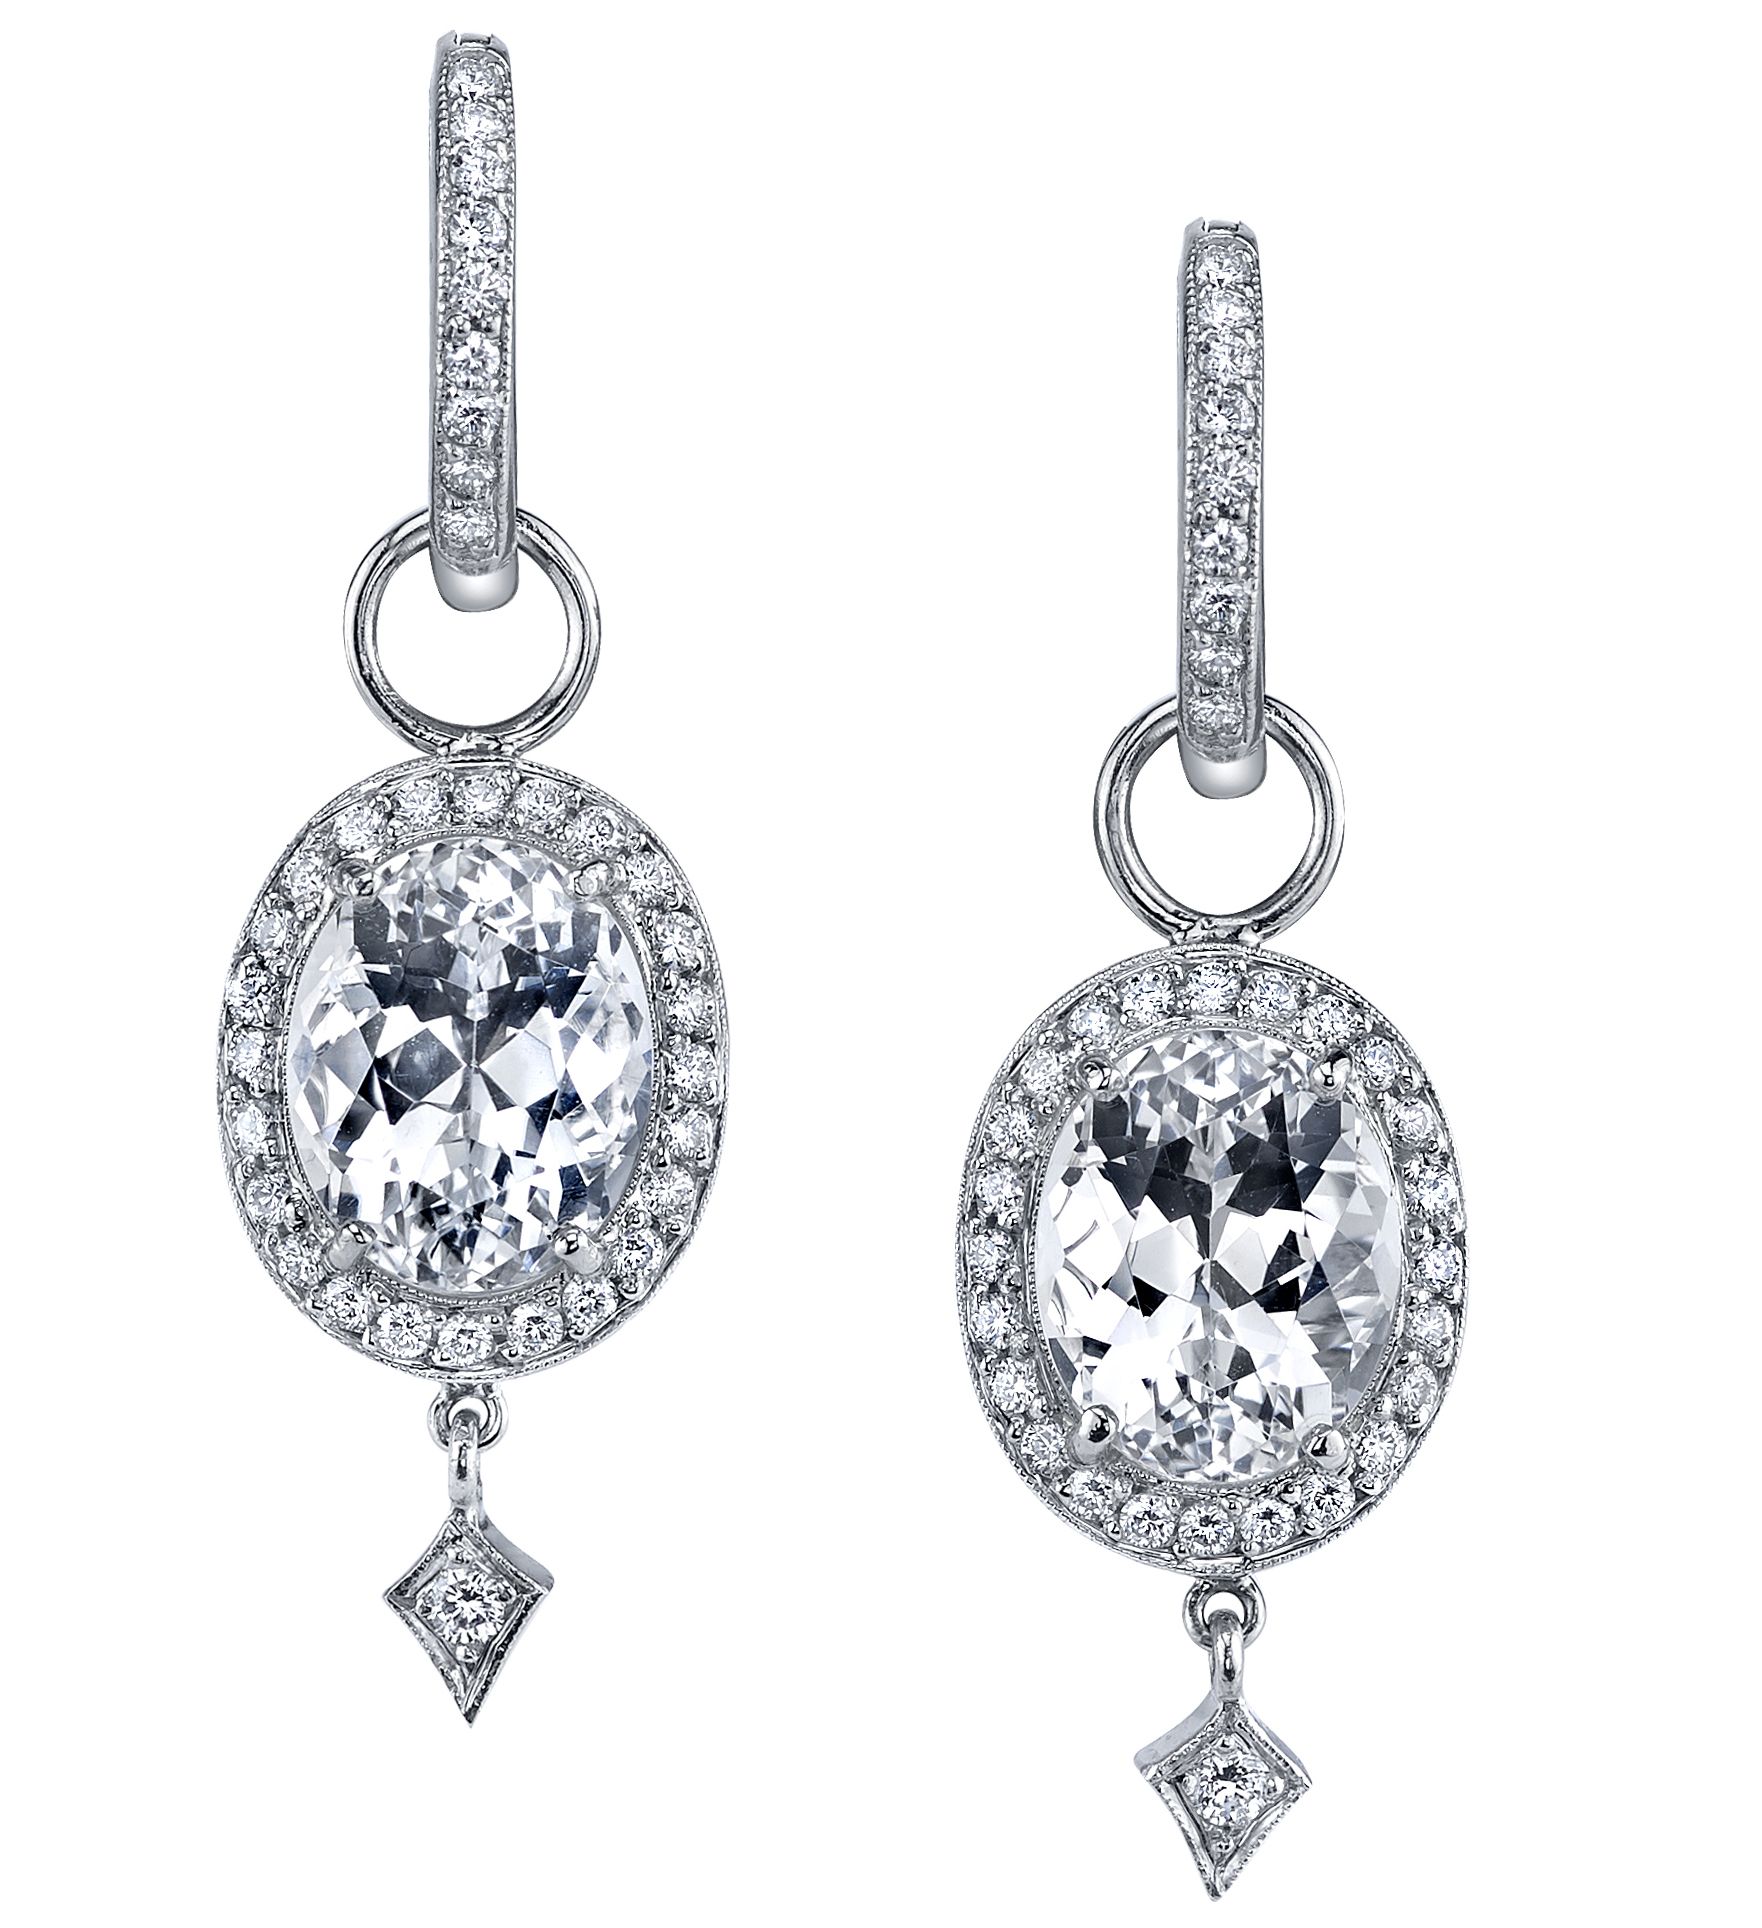 Eva earrings in platinum with 7.43 cts. t.w. colorless topaz and 0.59